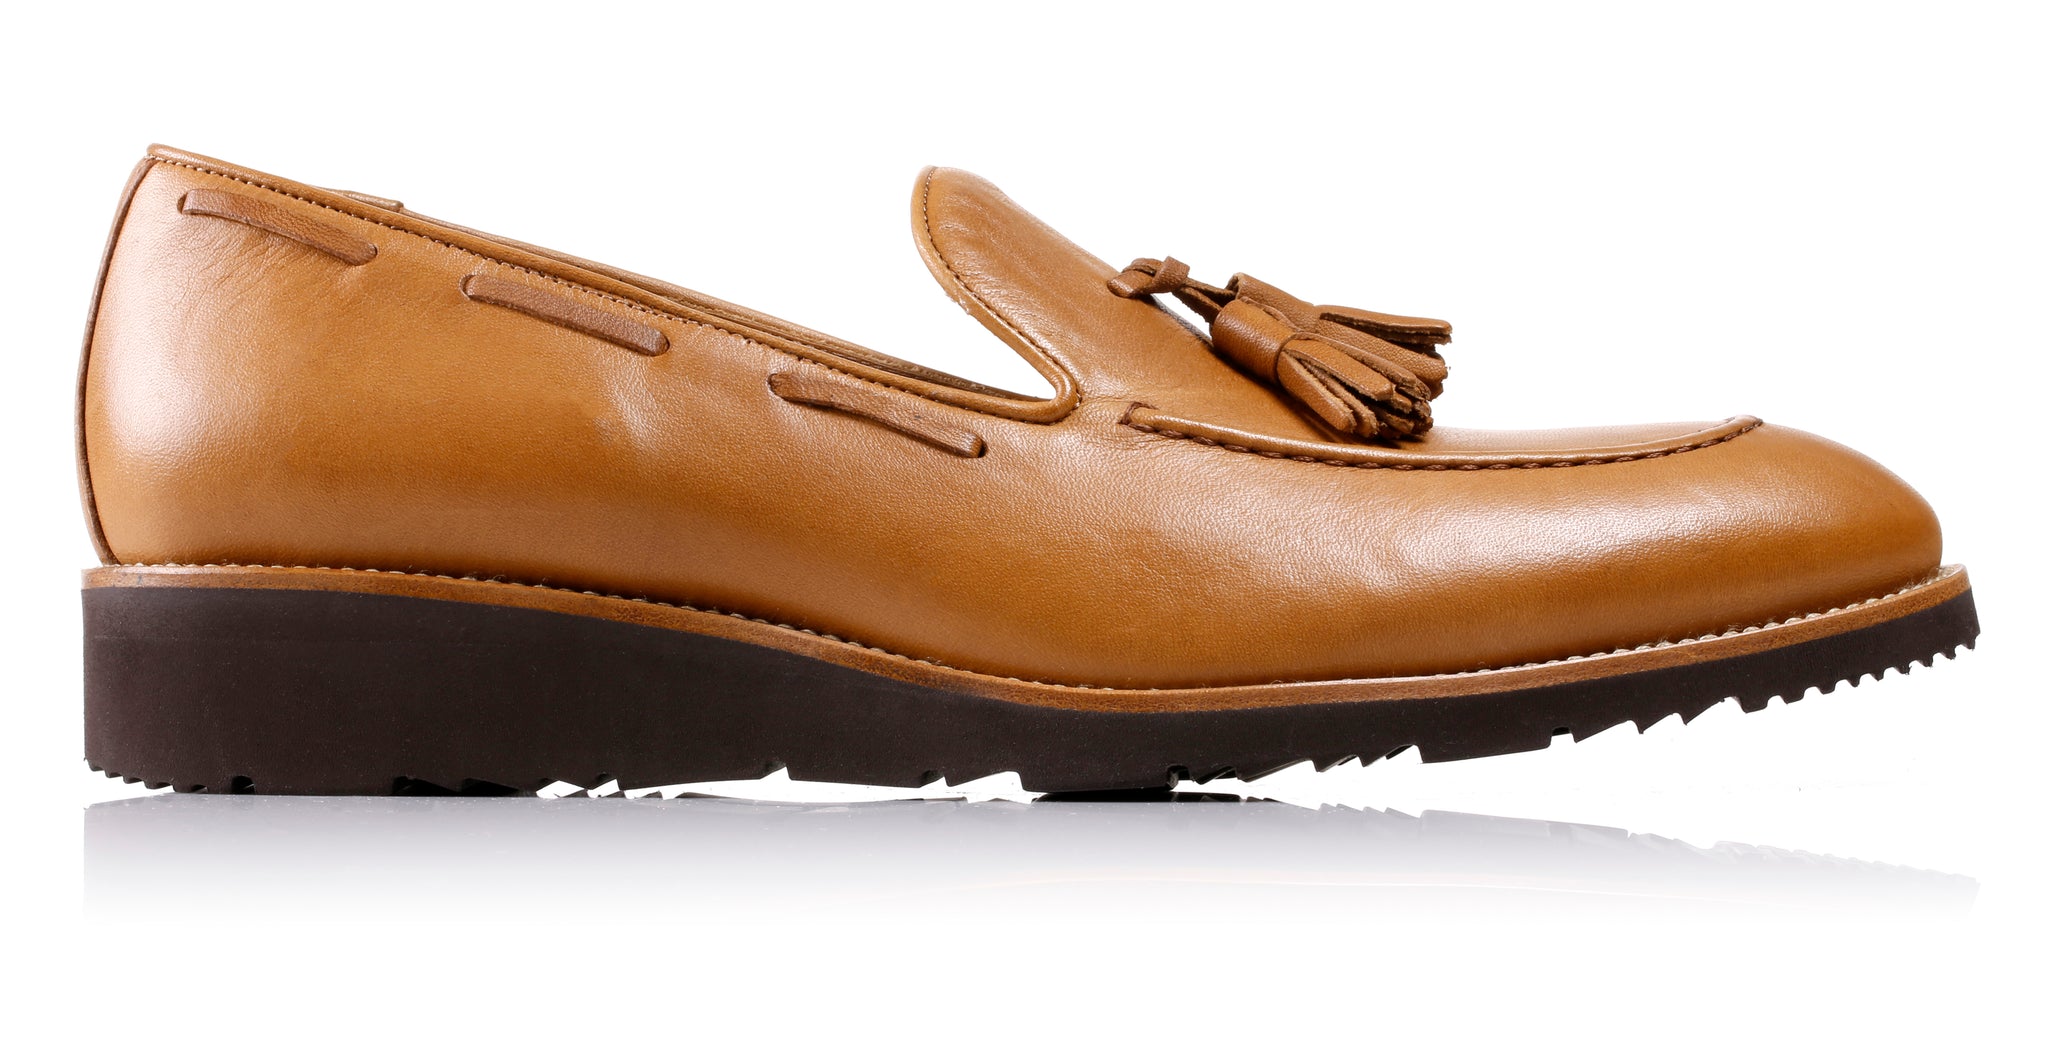 Men's Tan & Tan Accented Tassel Loafer with Brown Wedge Sole (EX-181)